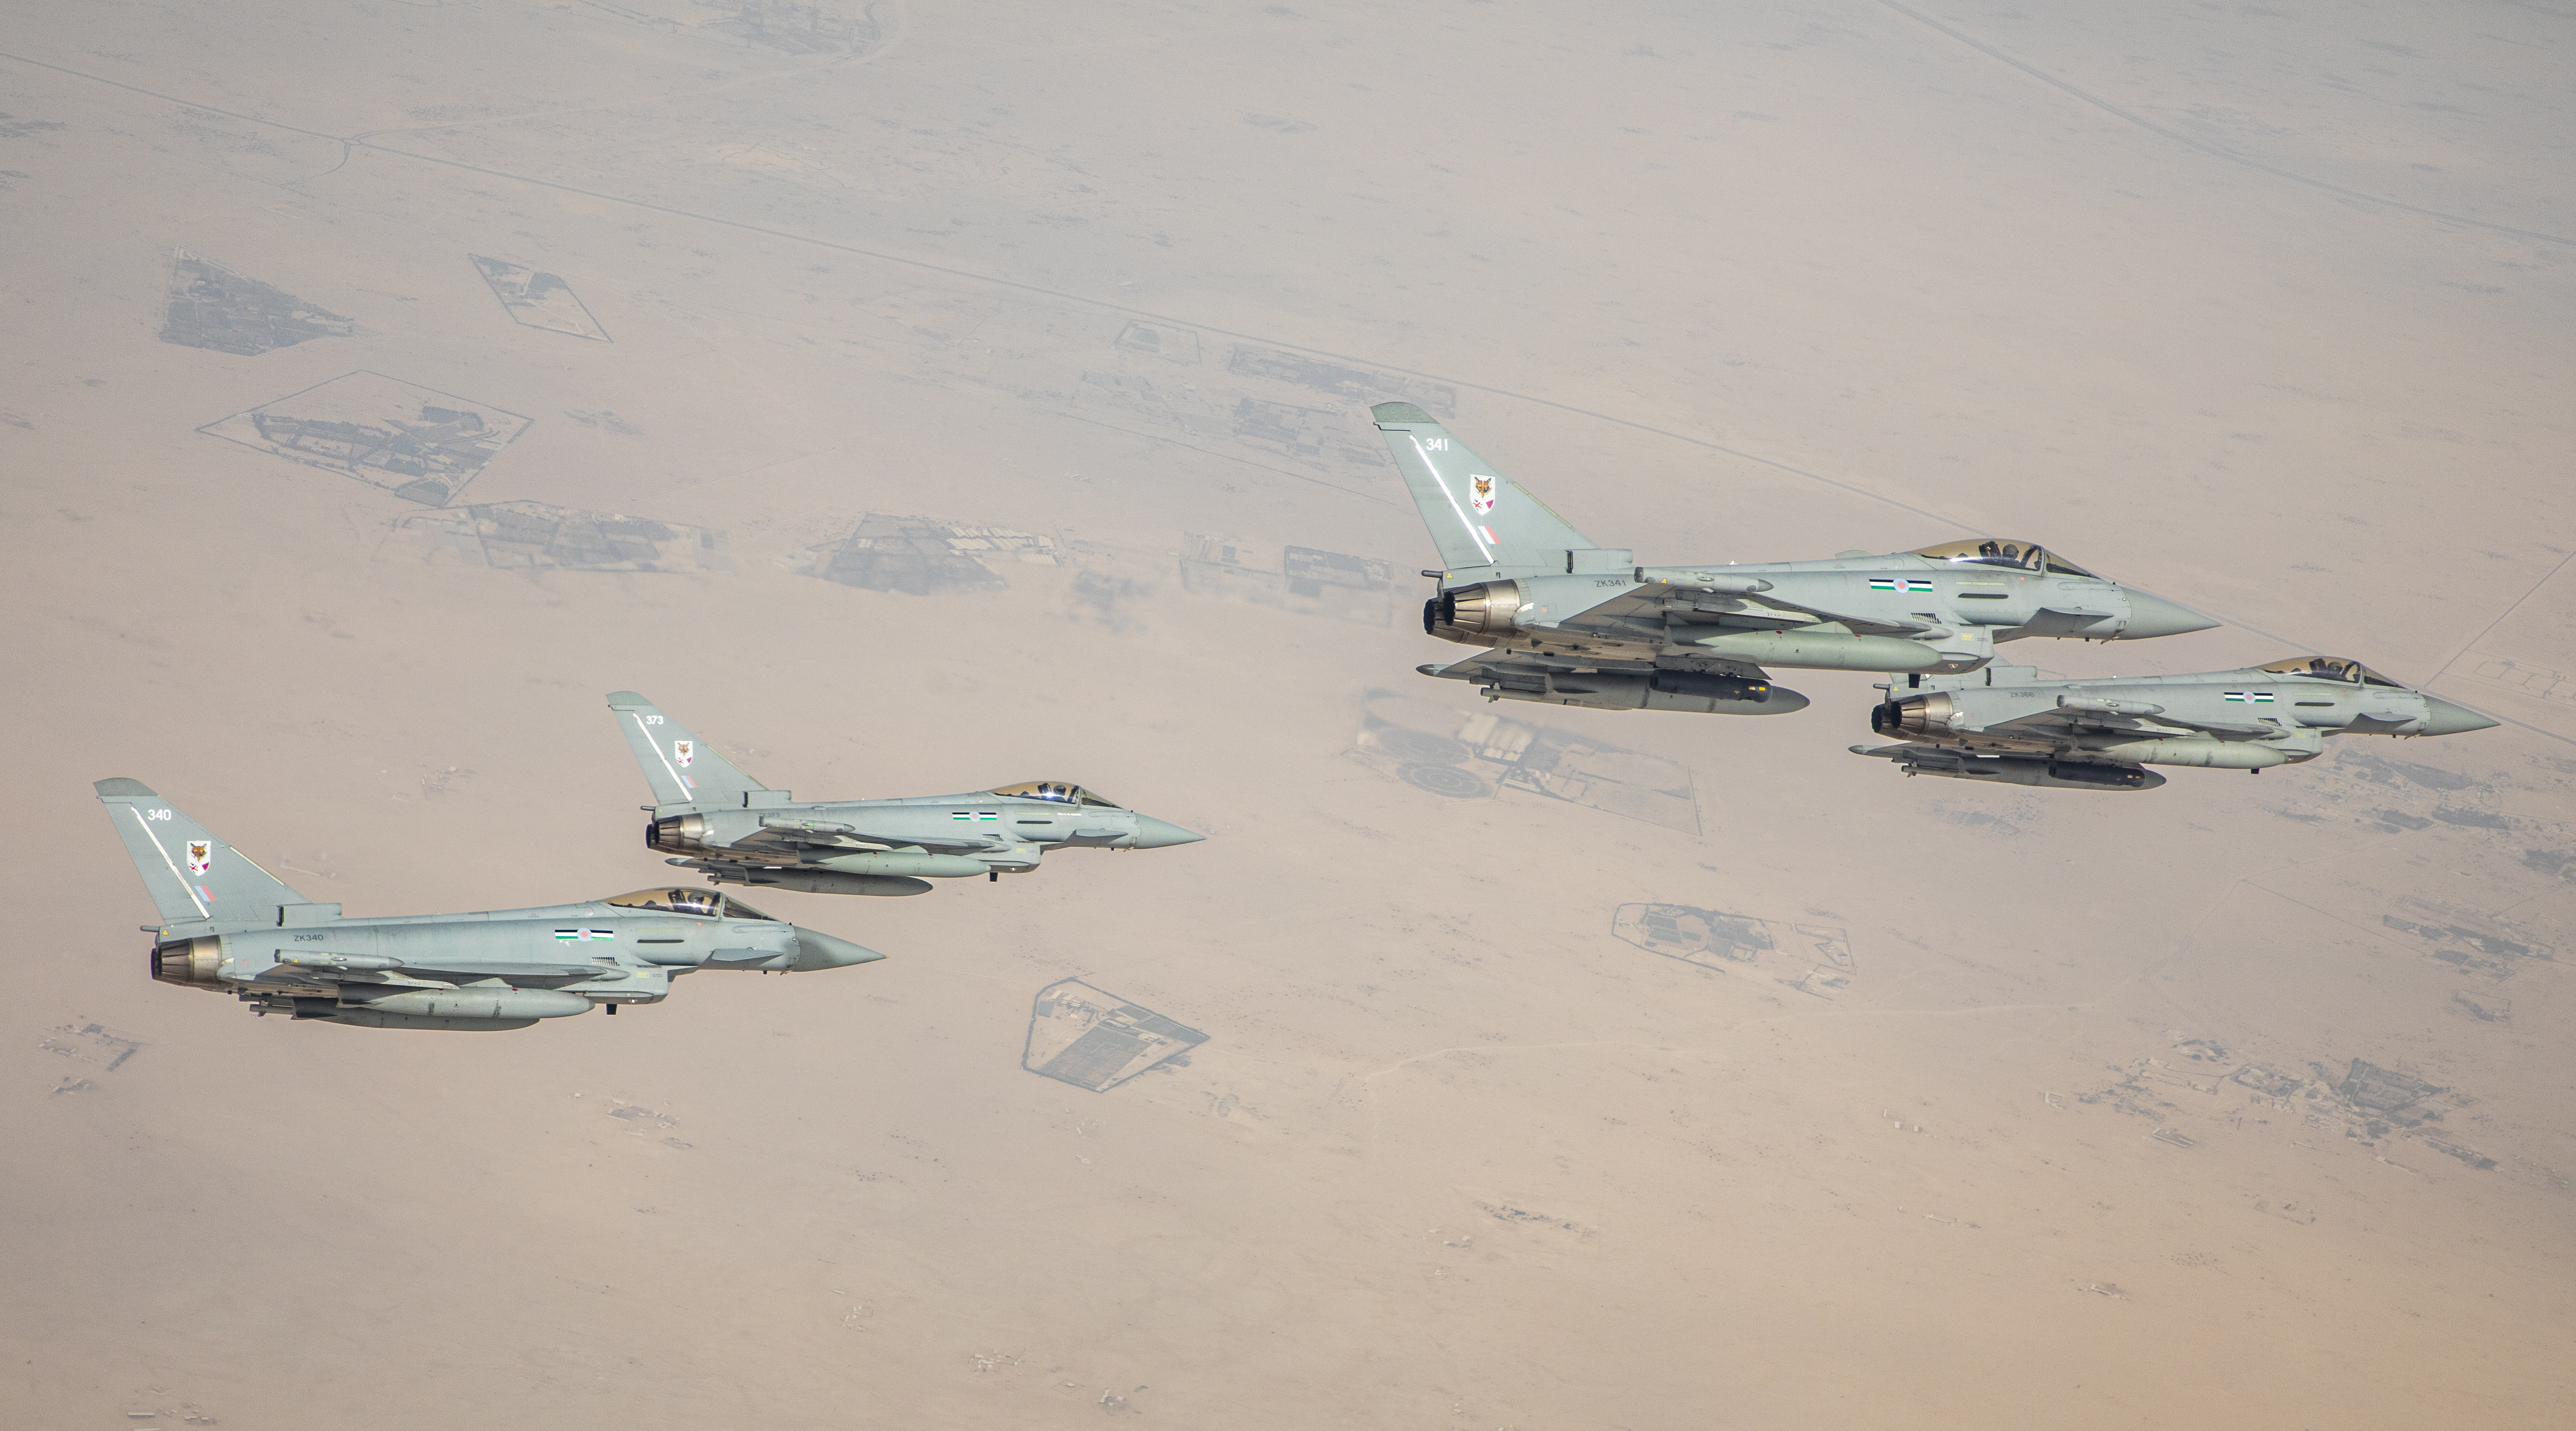 Image shows RAF Typhoon aircraft flying in formation.